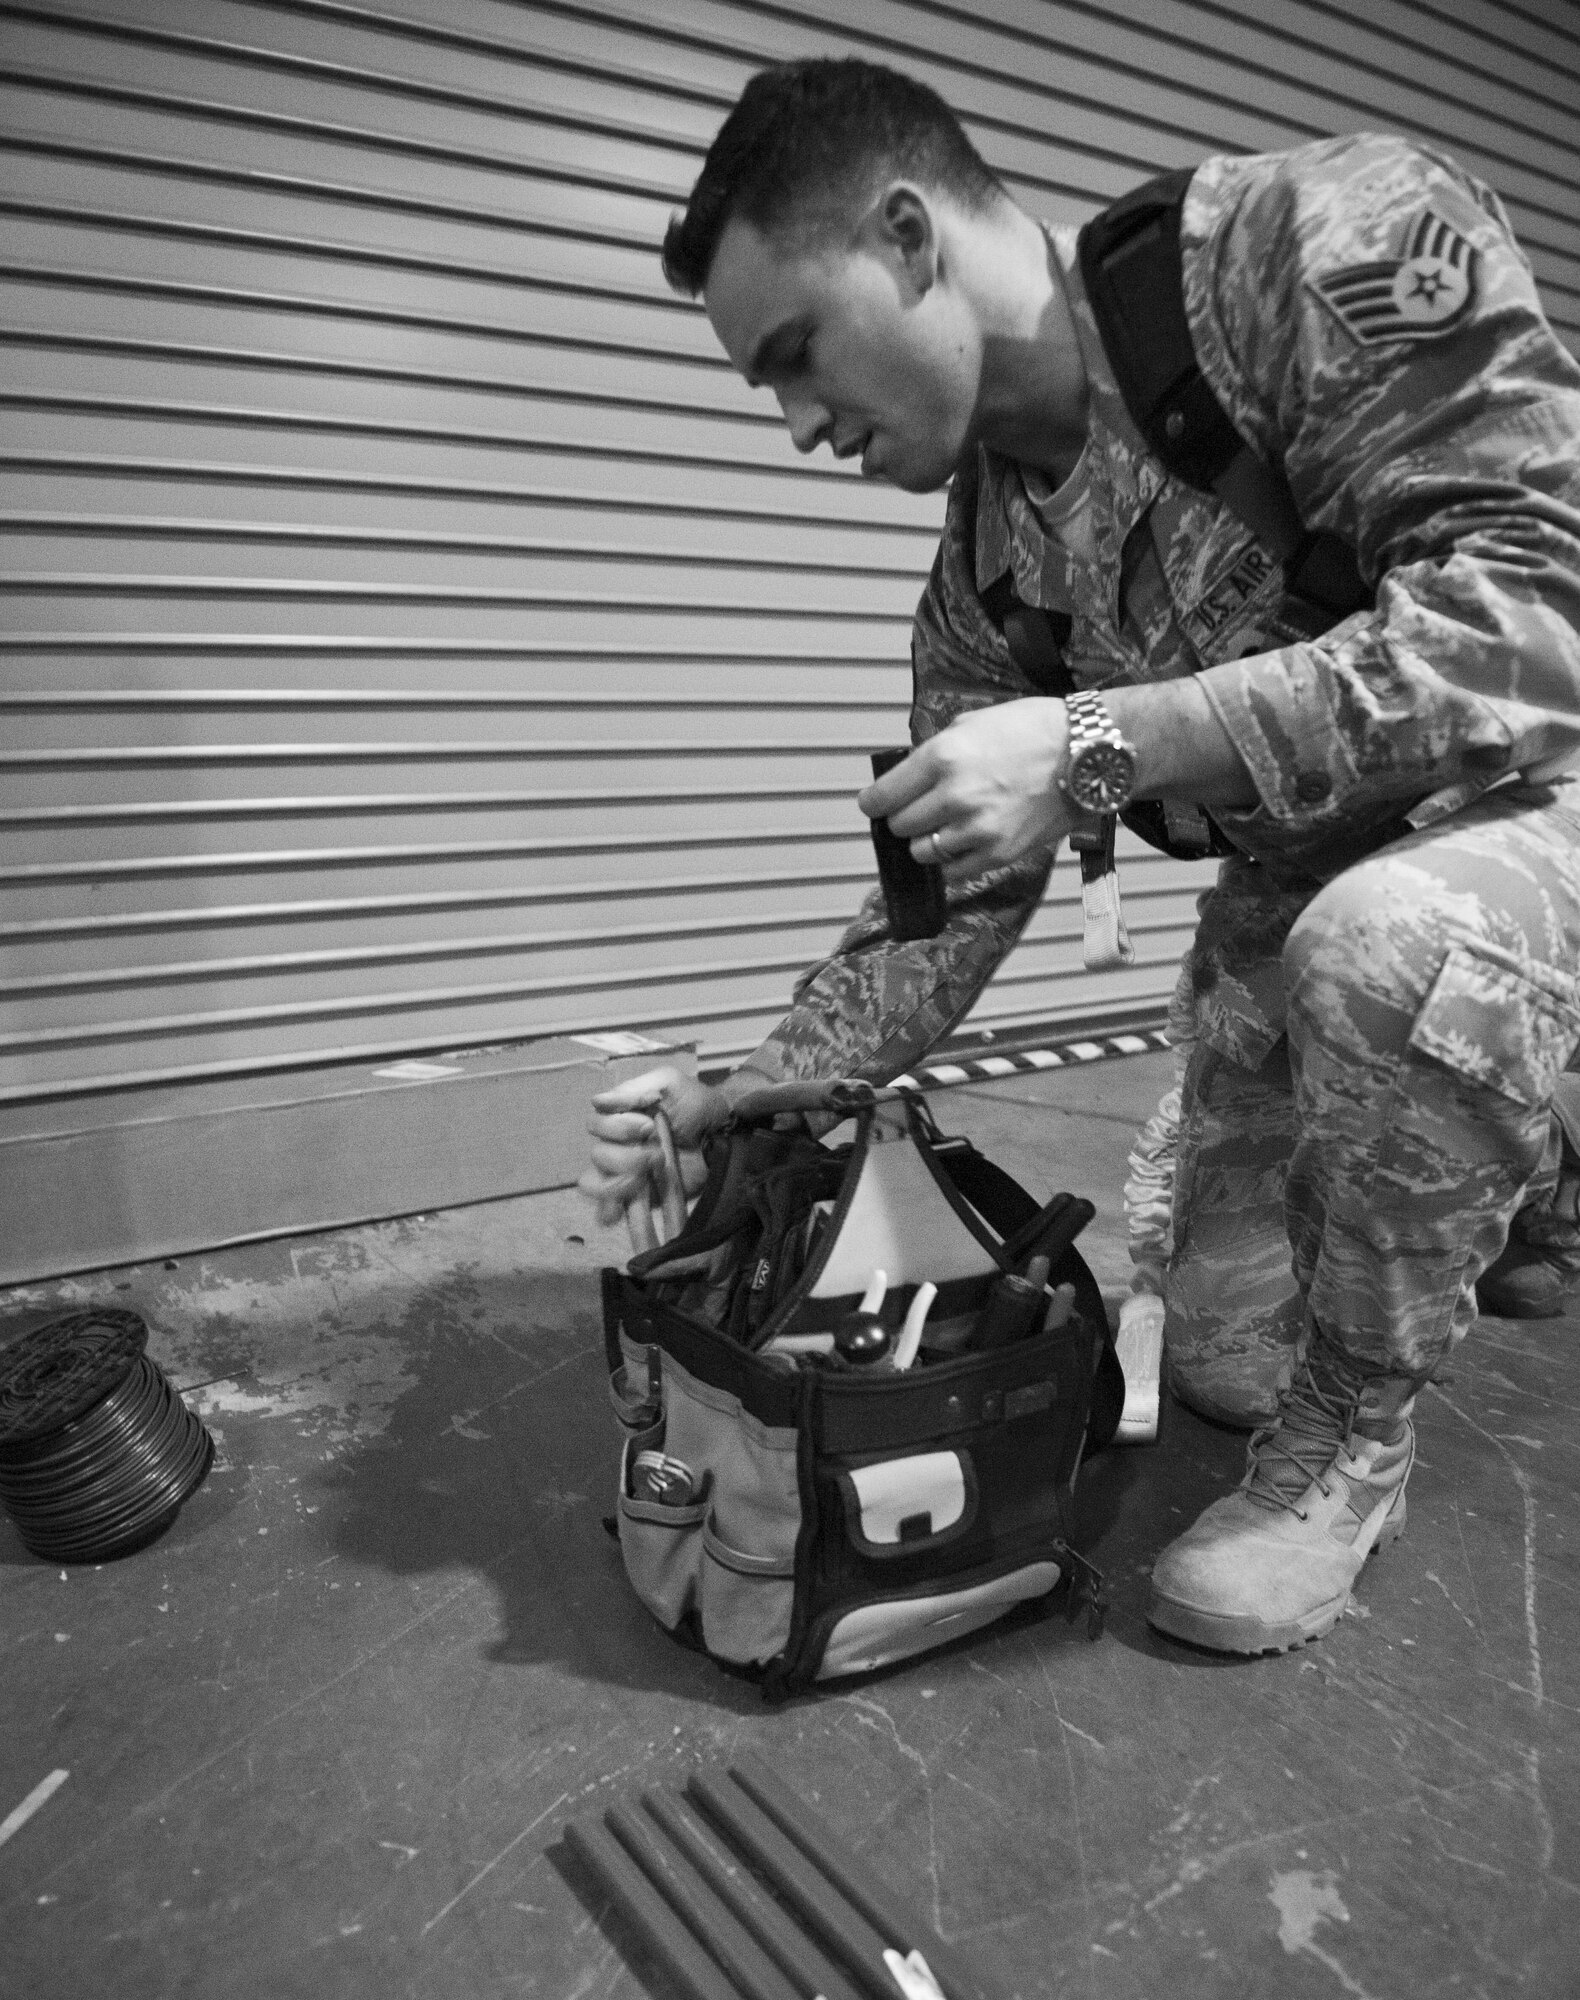 Staff Sgt. Elliot Holloway, 1st Special Operations Civil Engineer Squadron electrical systems craftsman, looks for a tool to cut a conduit on Hurlburt Field, Fla., Feb. 18, 2015. Holloway and his team used several conduits to update a fire system. (U.S. Air Force photo/Senior Airman Krystal M. Garrett)